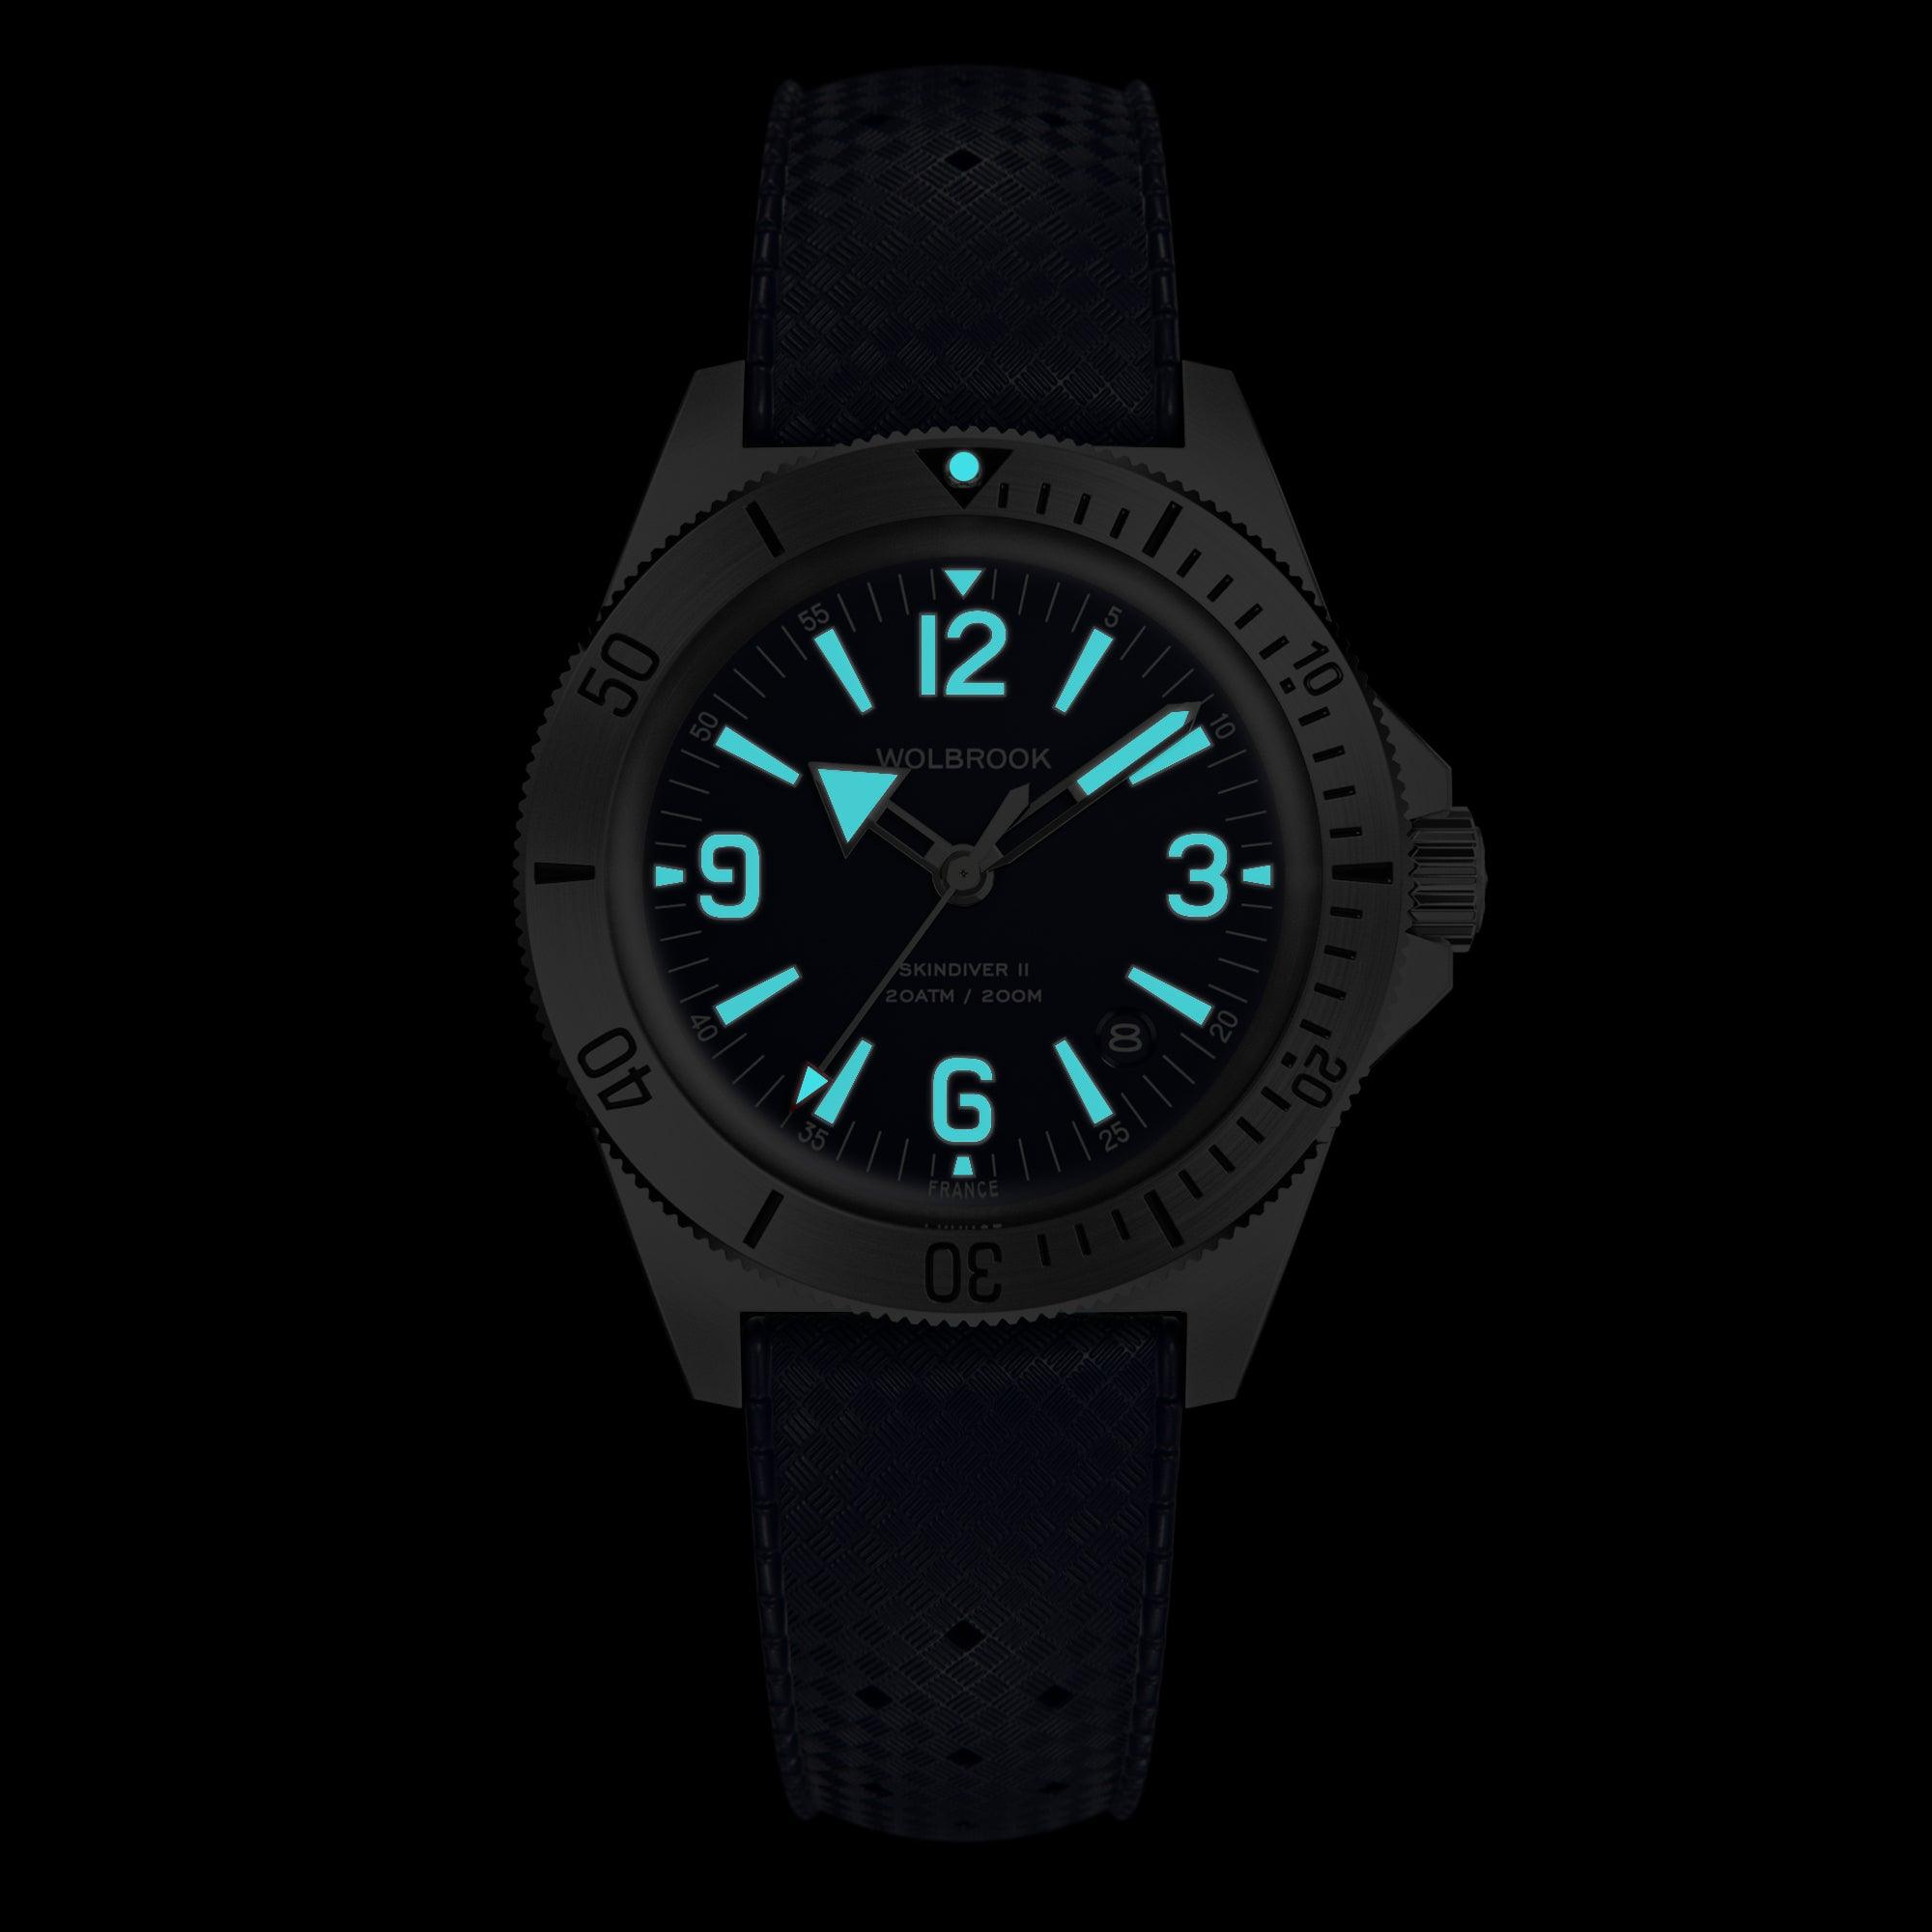 Skindiver II Automatic Dive Watch - Blue – Wolbrook Watches